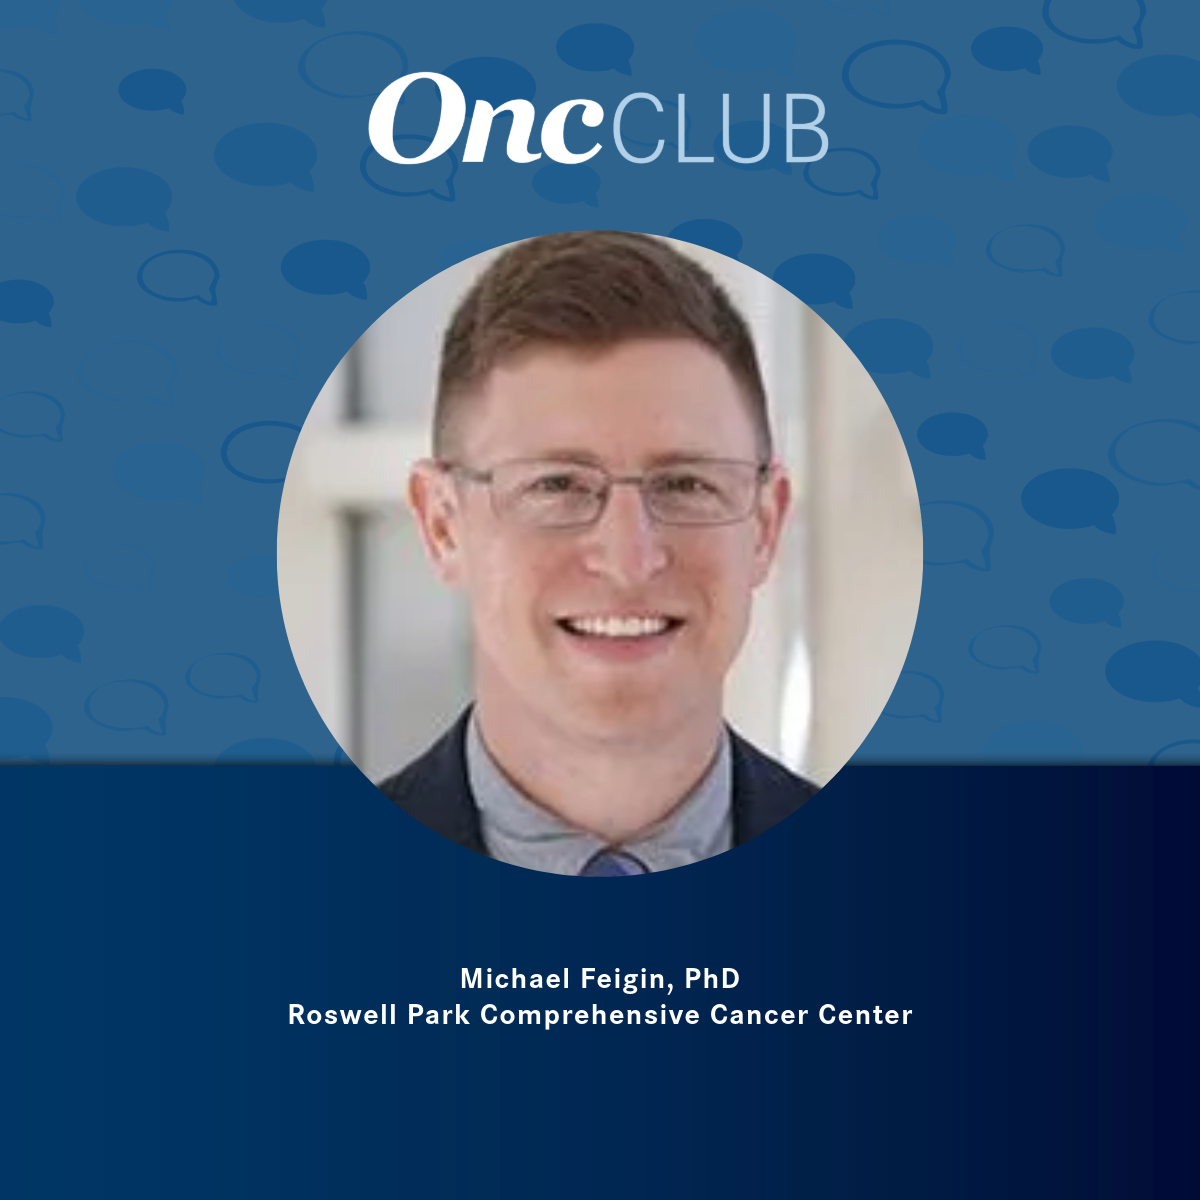 Michael Feigin, PhD, of Roswell Park Comprehensive Cancer Center